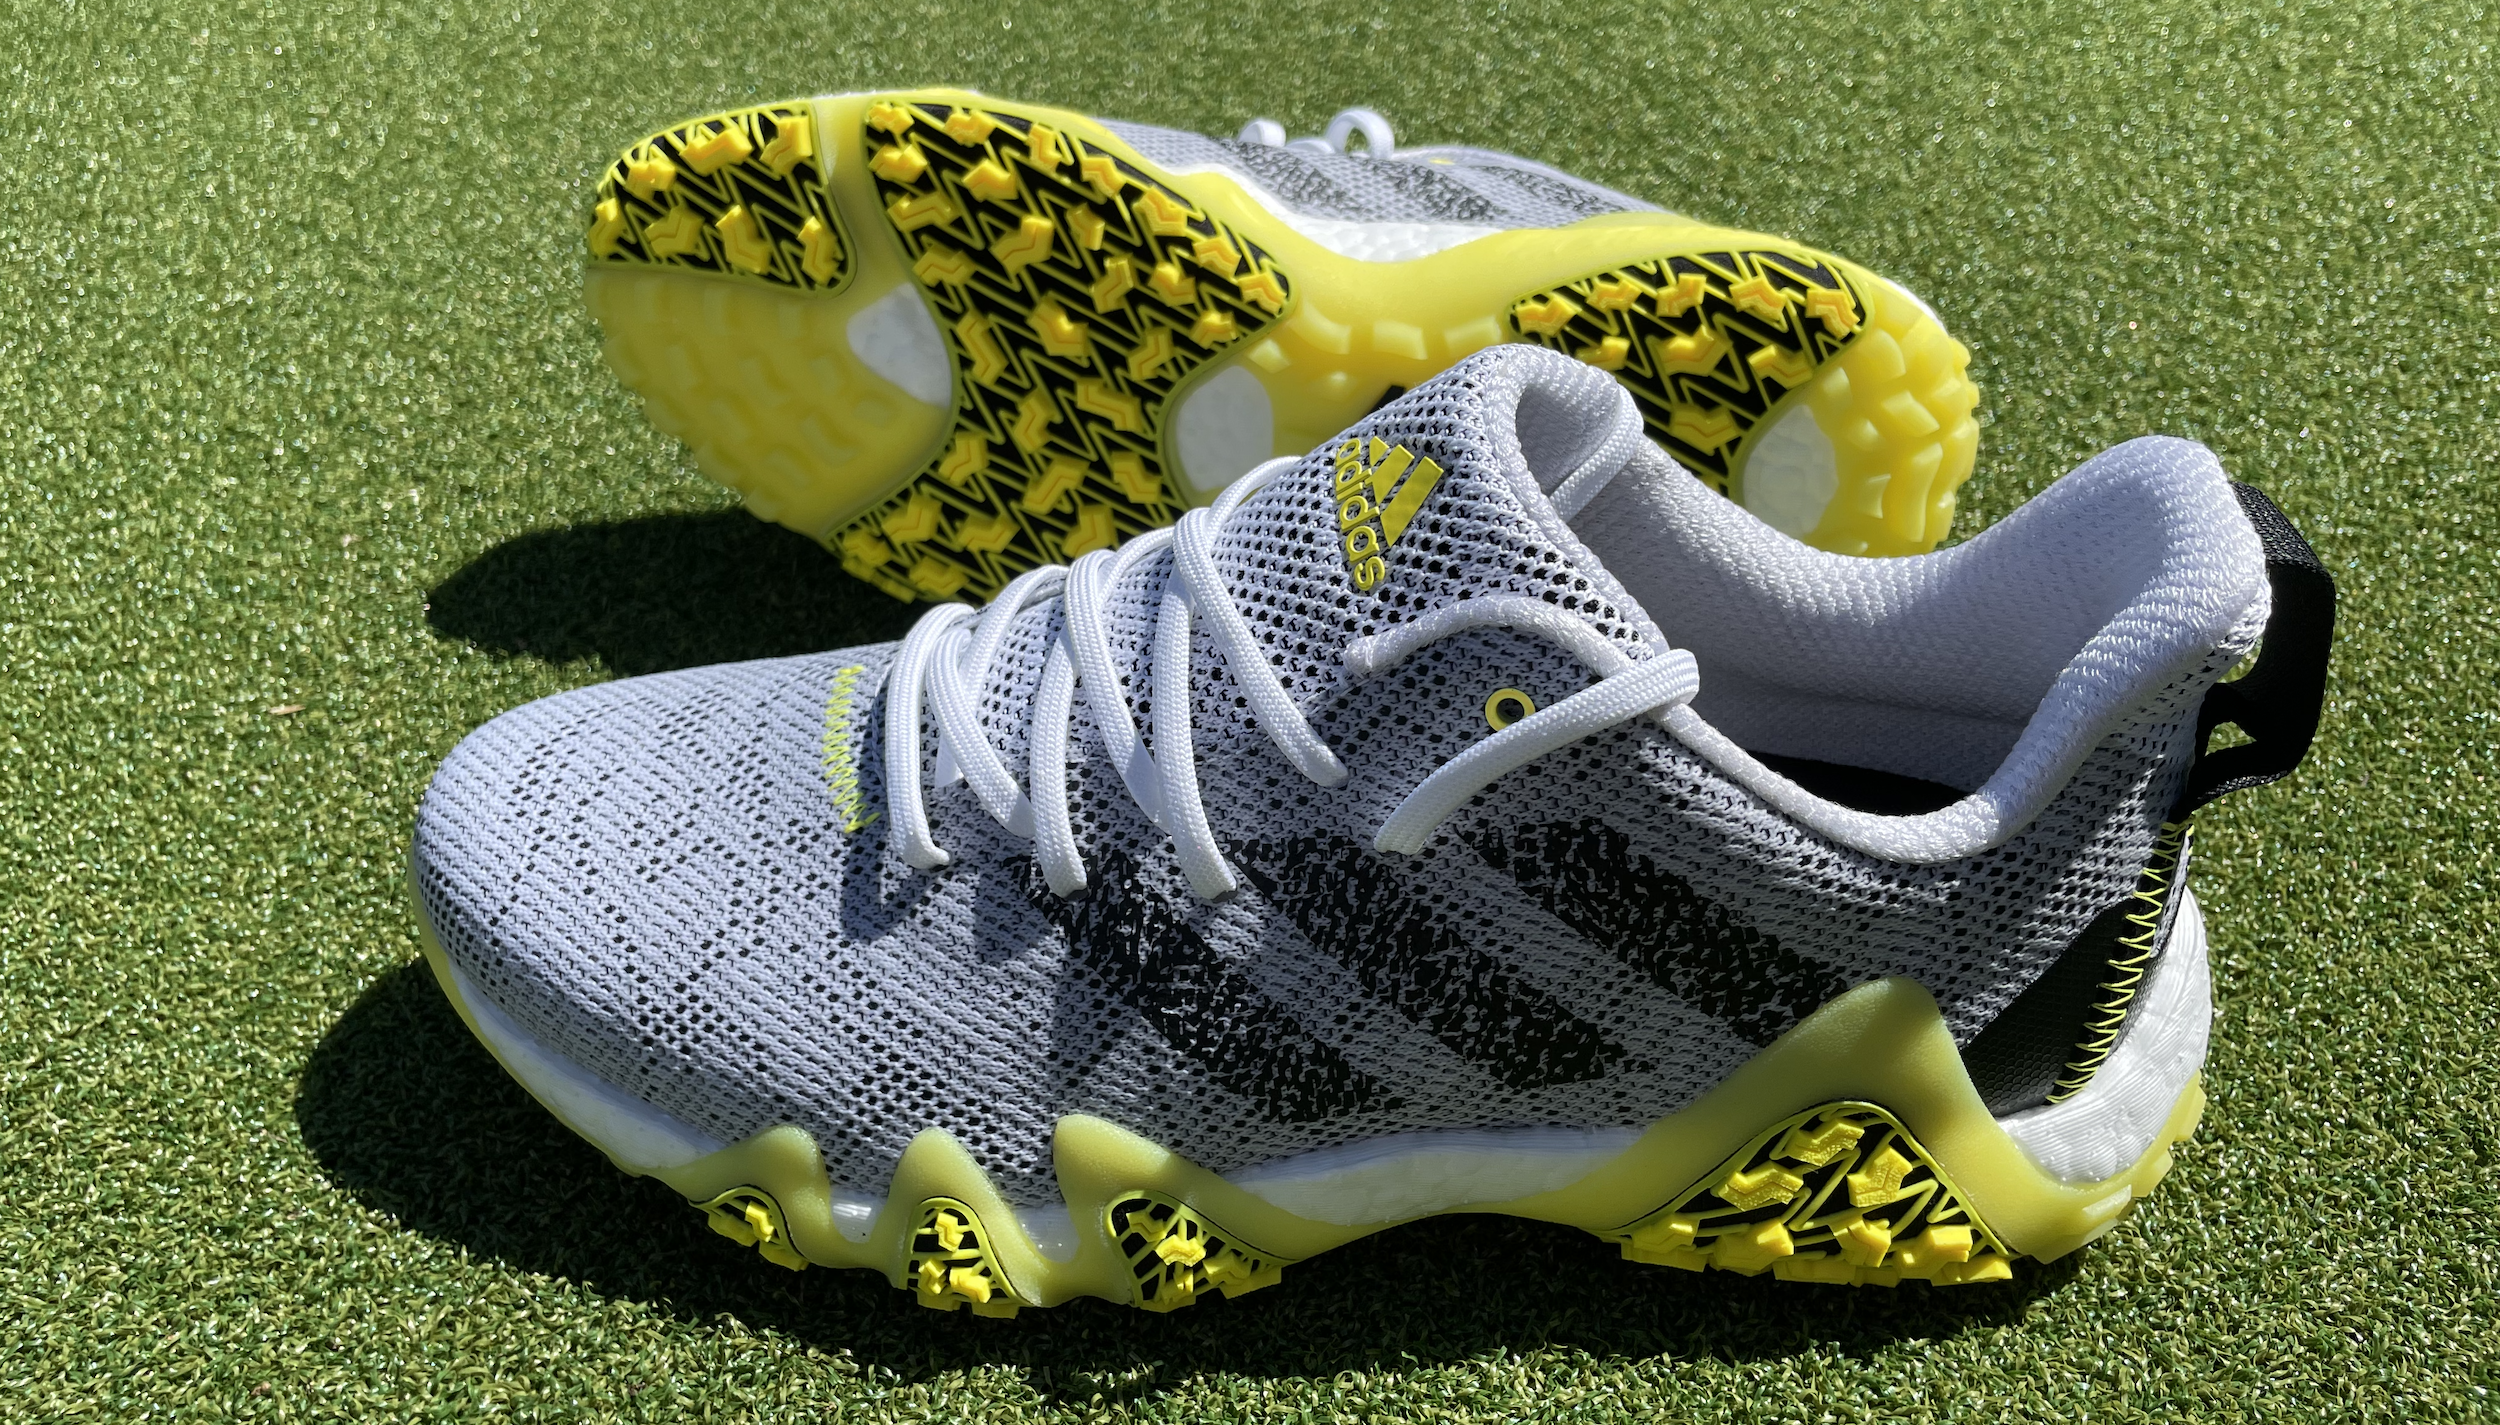 Adidas 22 review: the most comfortable golf shoe I've ever worn | T3